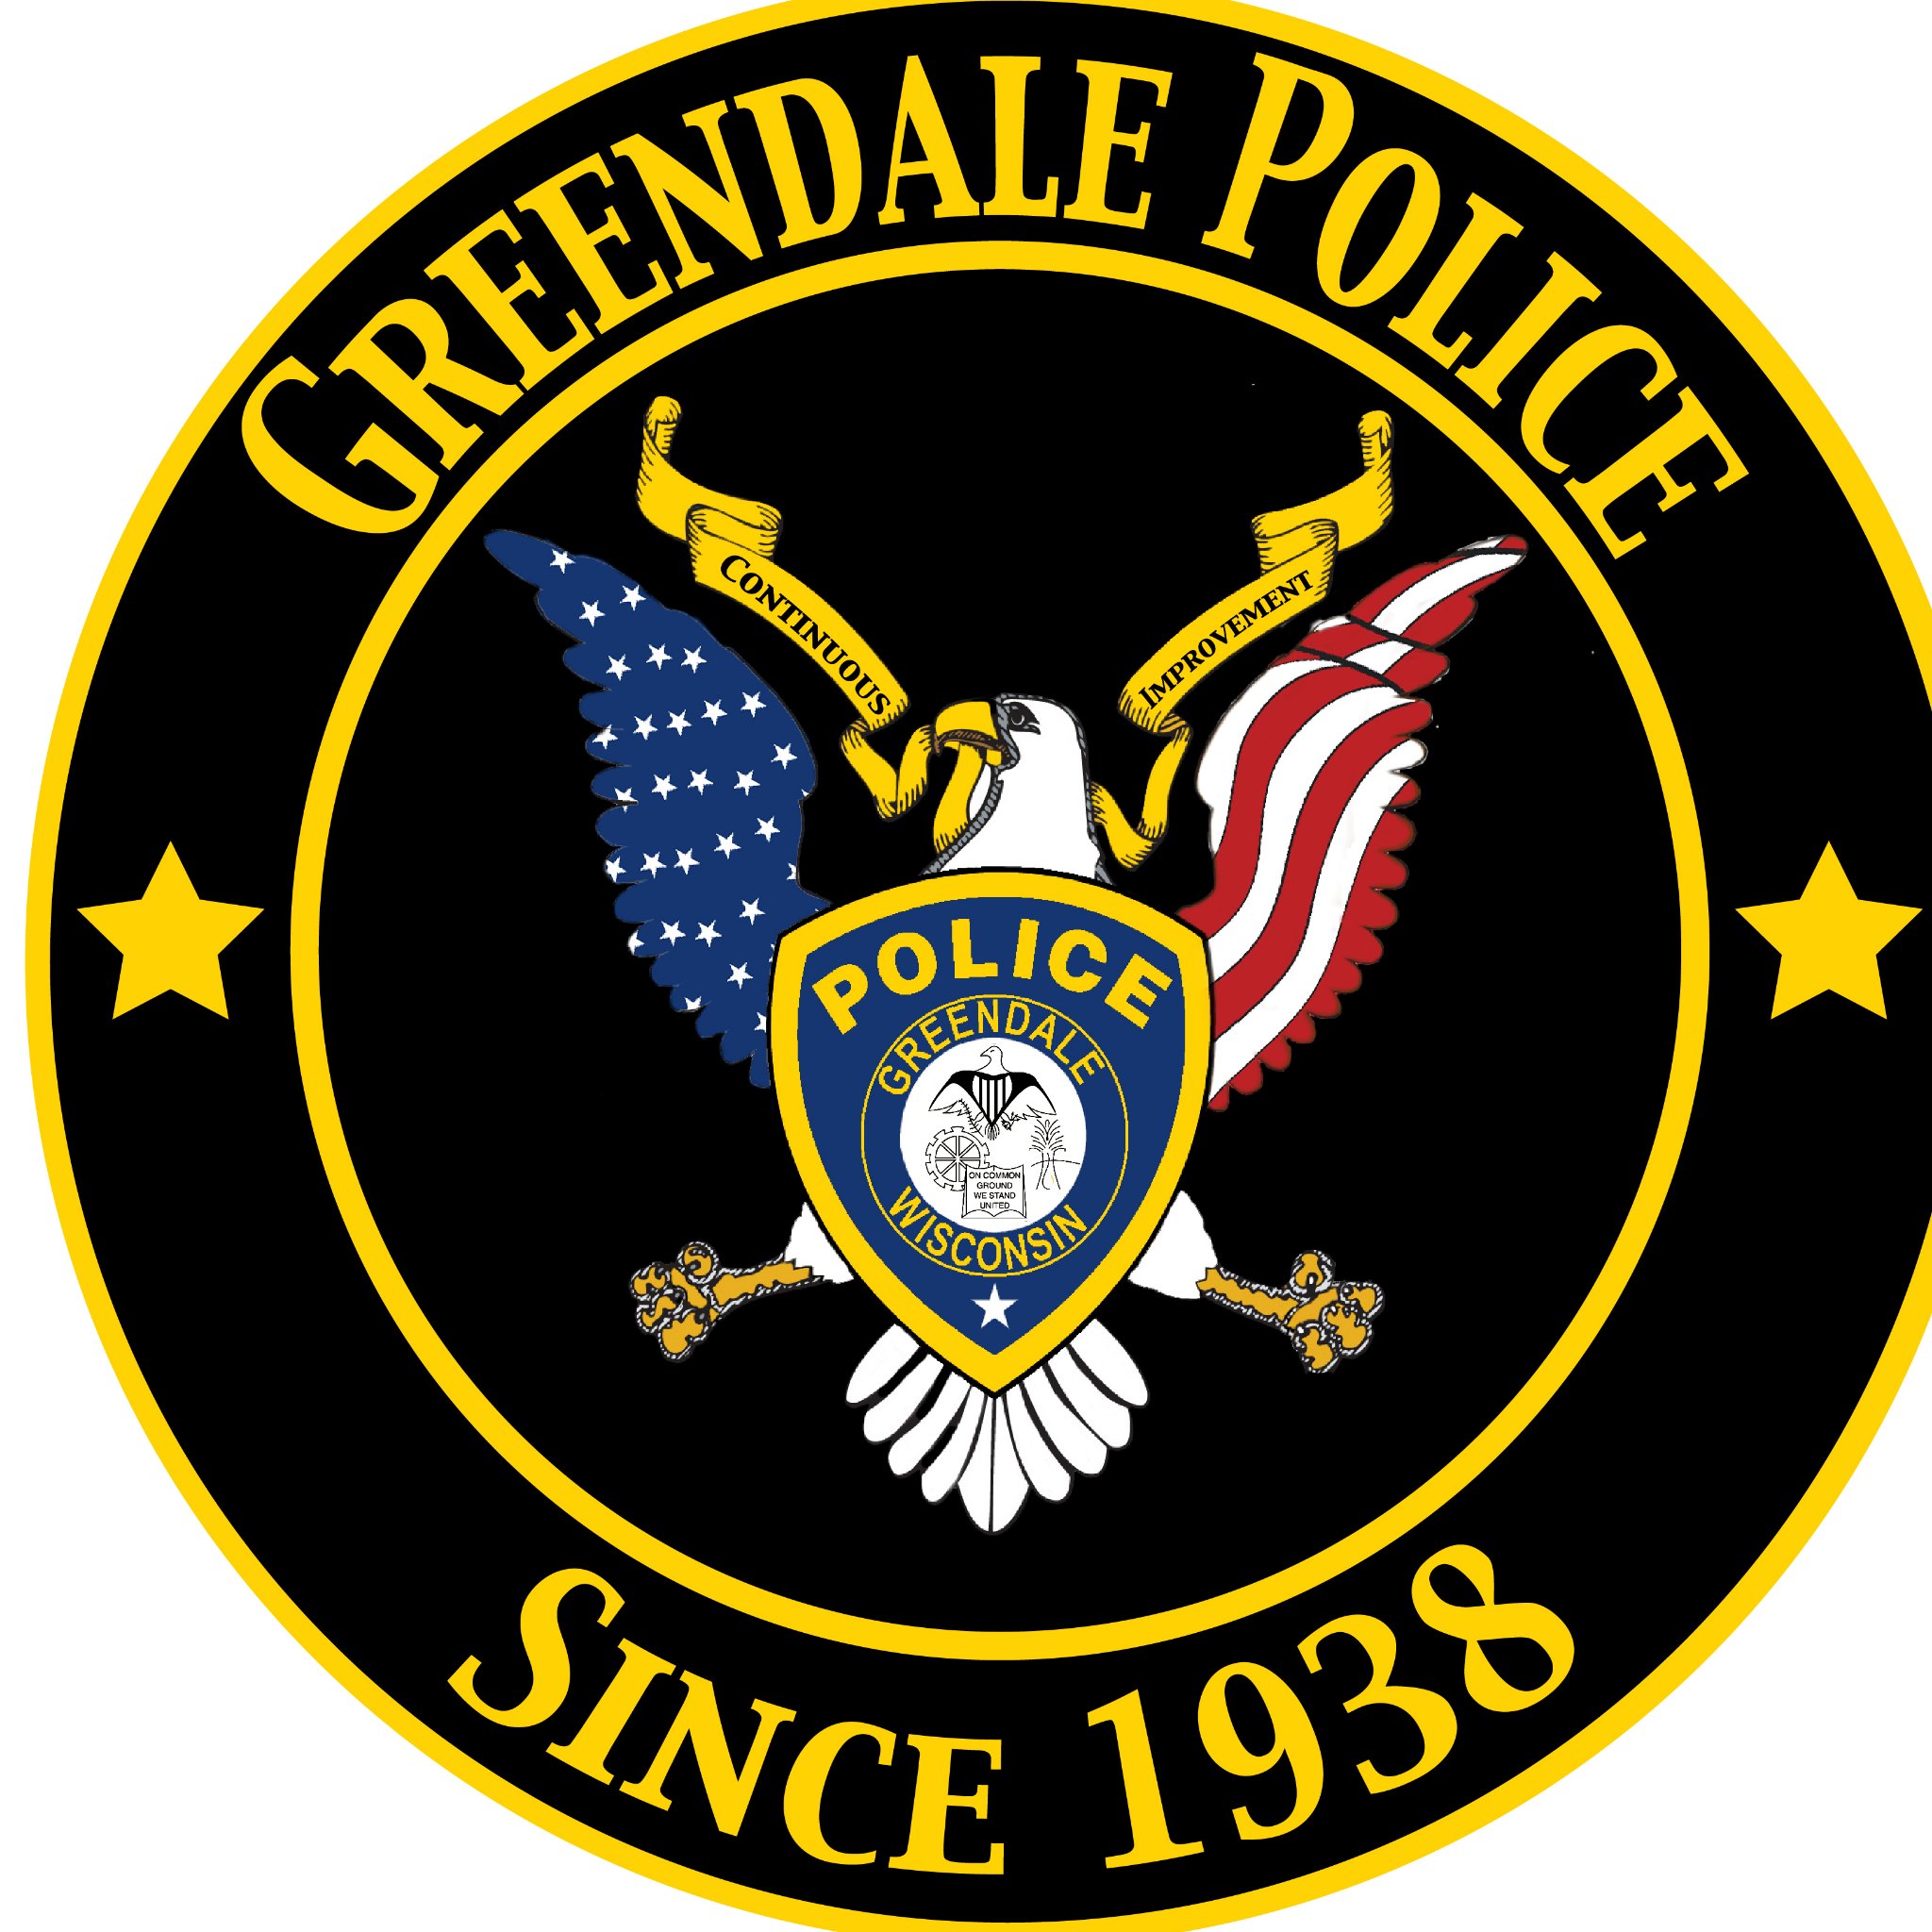 This is the official Twitter page of the Village of Greendale Police Department, created to provide information on the Police Department activity.